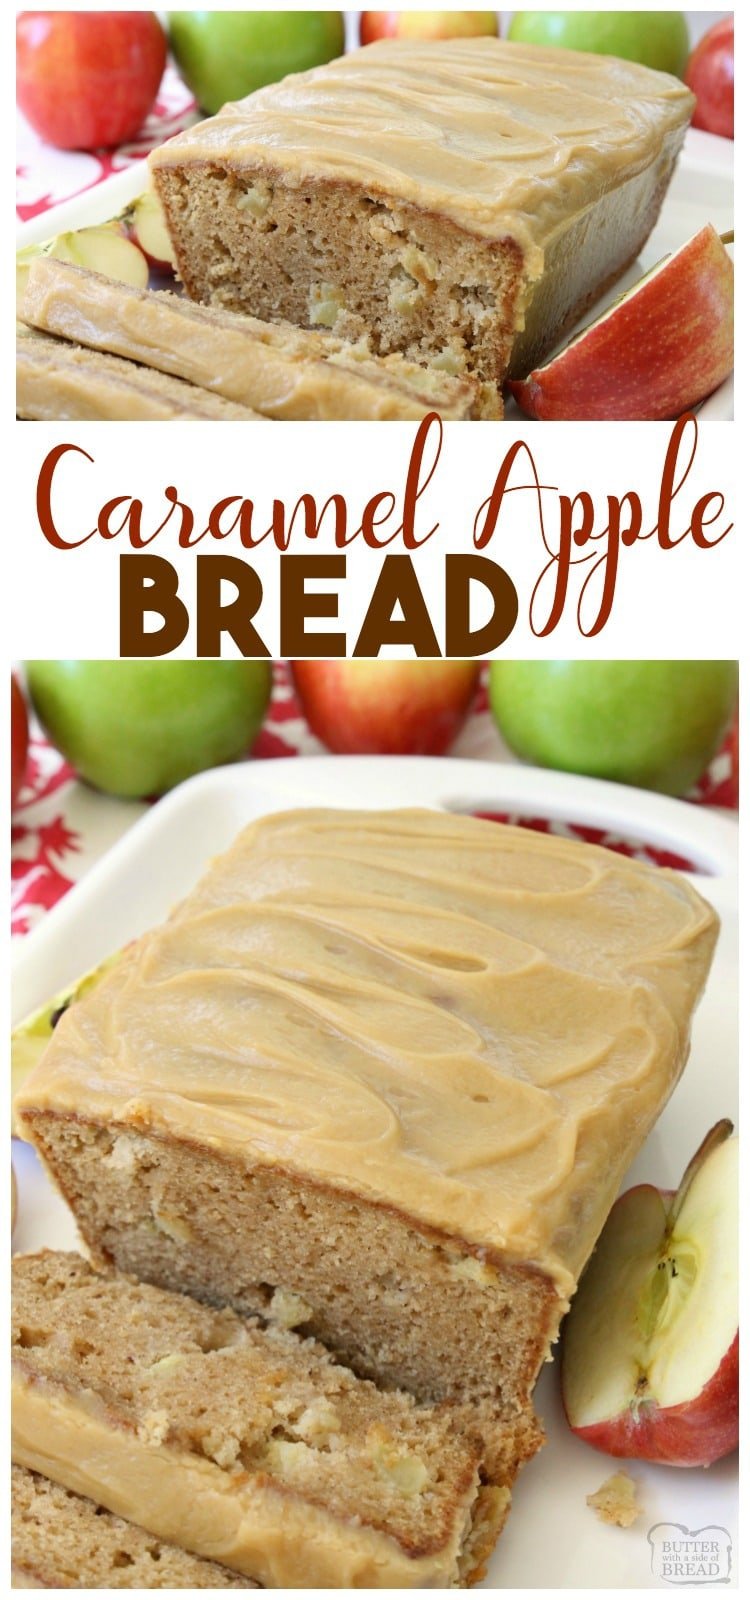 Caramel Apple Bread bursting with fresh apple, spiced with cinnamon and nutmeg, then topped with an incredibly delicious & easy to make caramel glaze. Fantastic apple quick bread recipe that everyone goes crazy over!